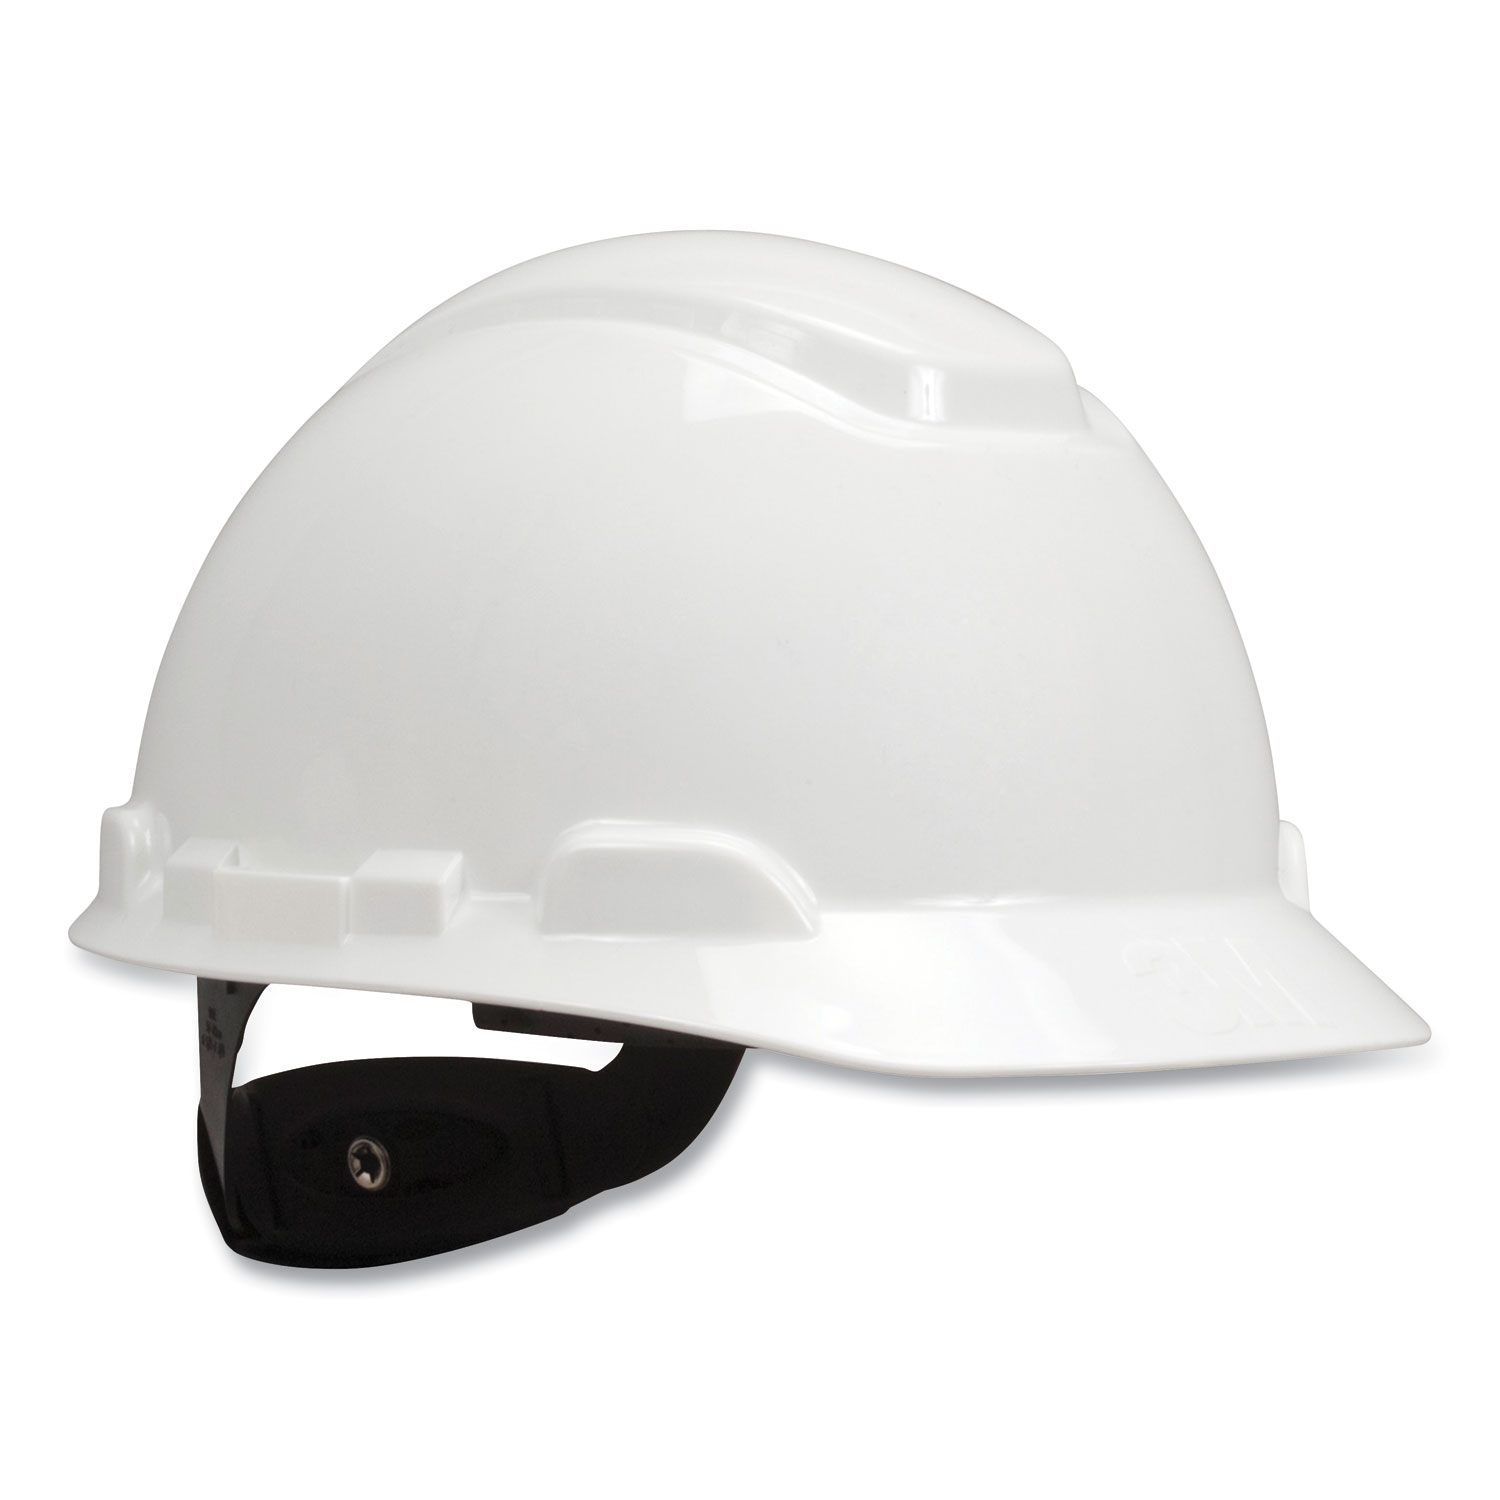  3M H-701R-UV H-700 Series Hard Hat with Four Point Ratchet Suspension, UVicator Sensor, White (MMM239695) 